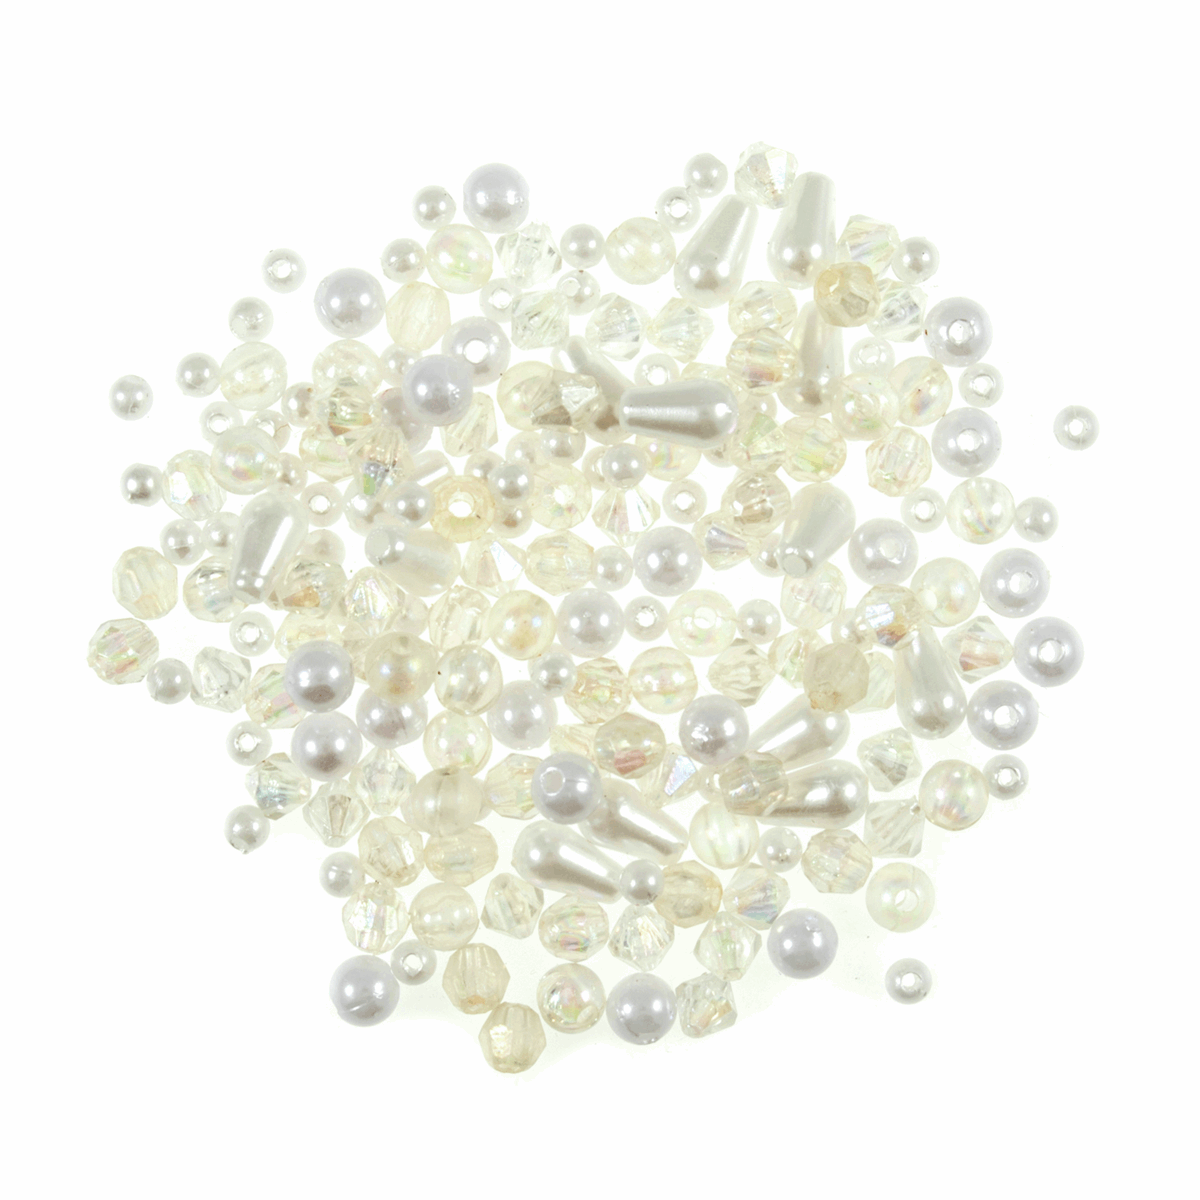 Trimits Assorted Pearl Beads - 30g